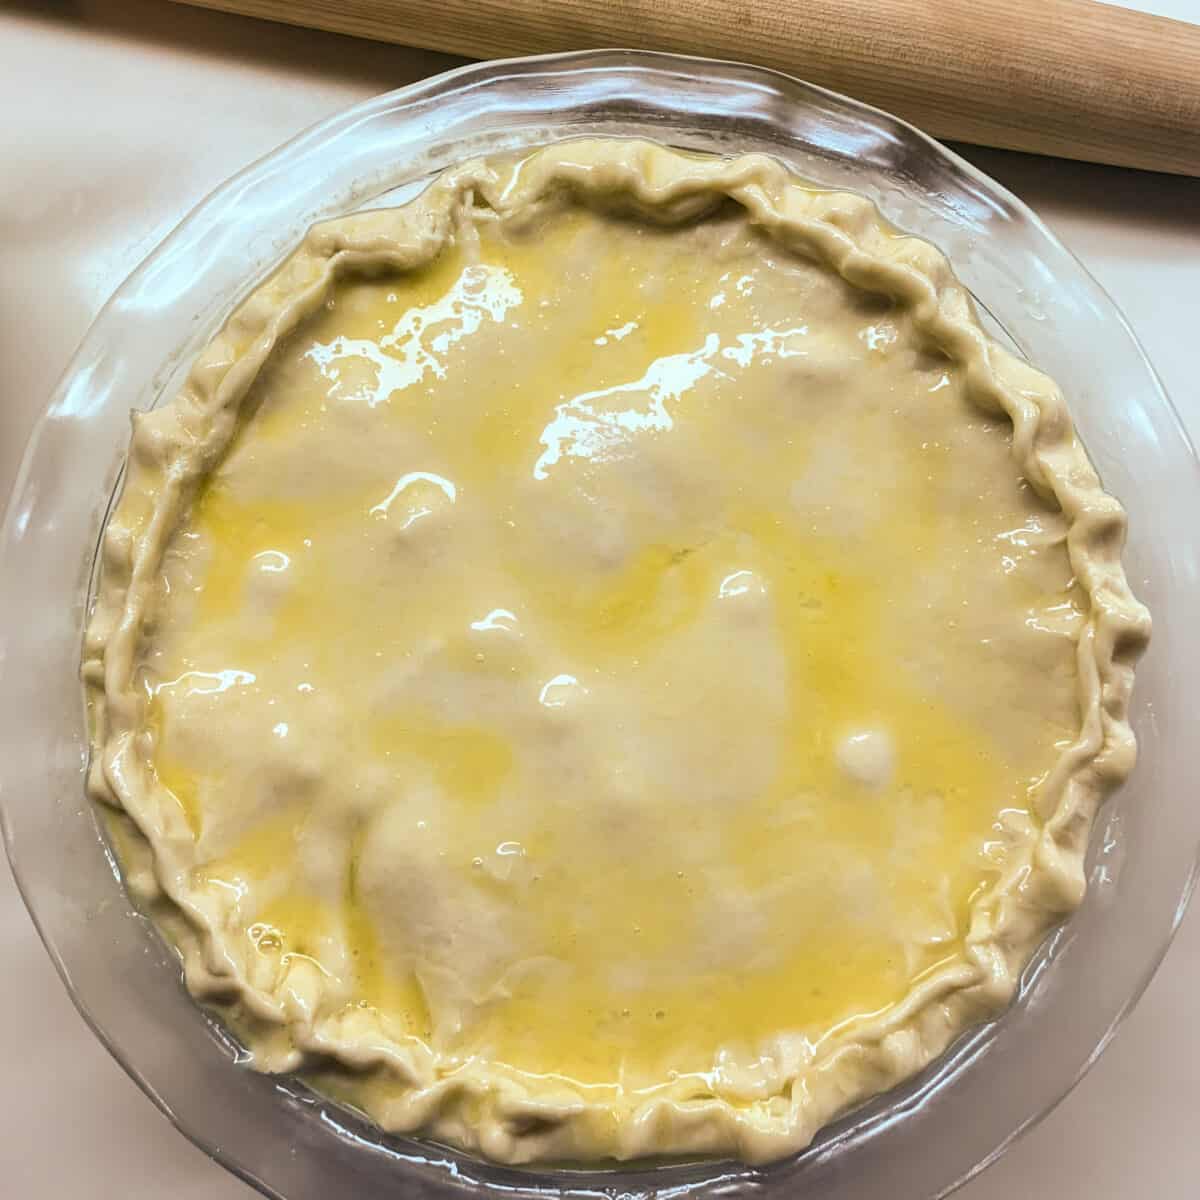 unbaked pie topped with top crust